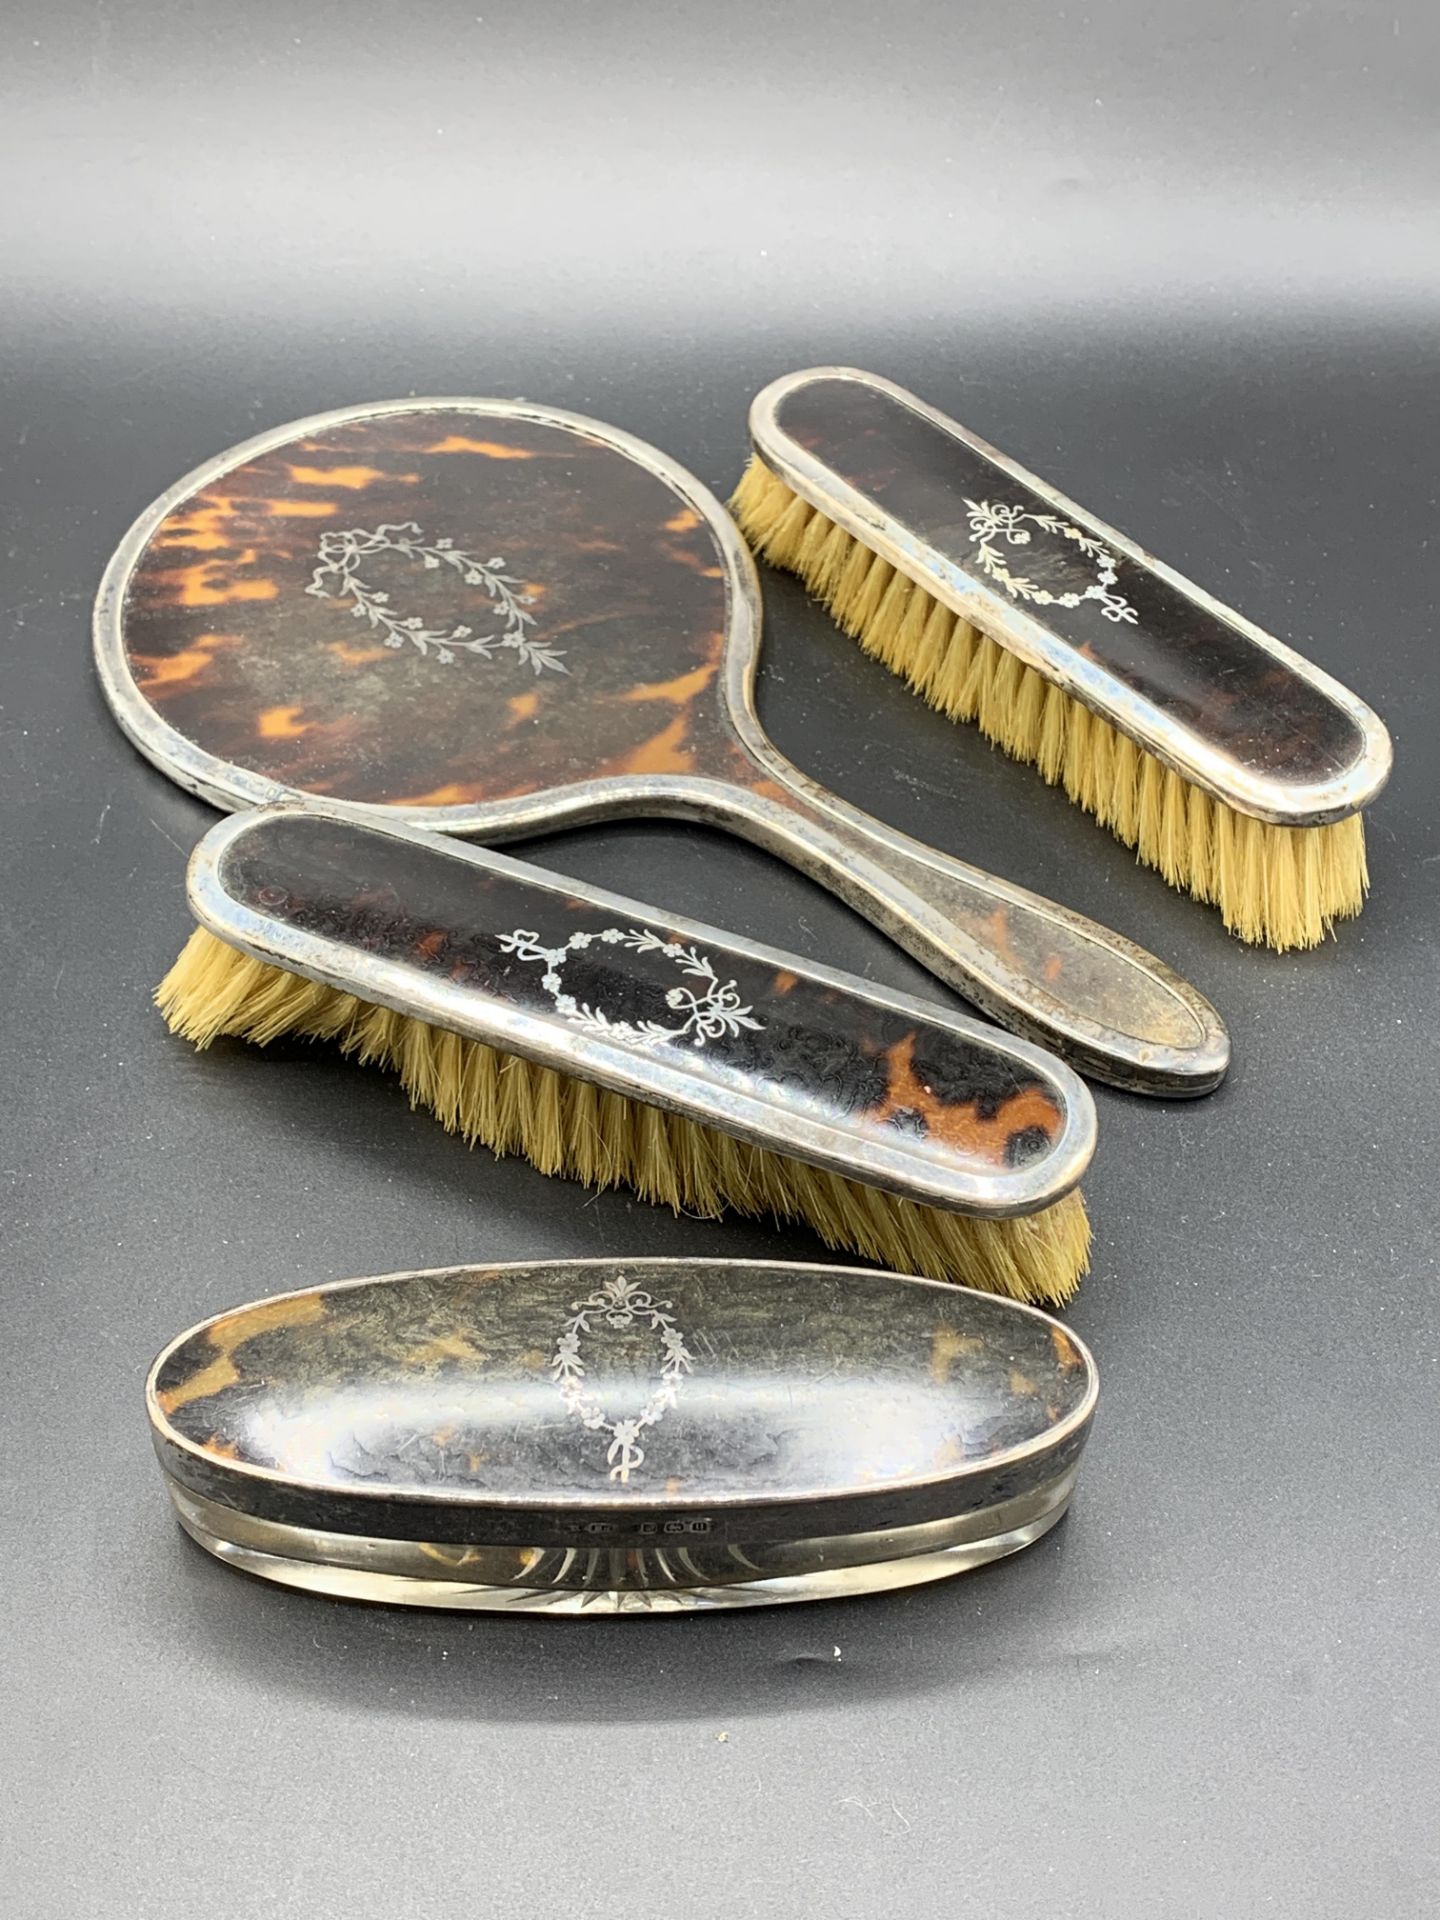 Silver and tortoiseshell dressing table set - Image 5 of 5